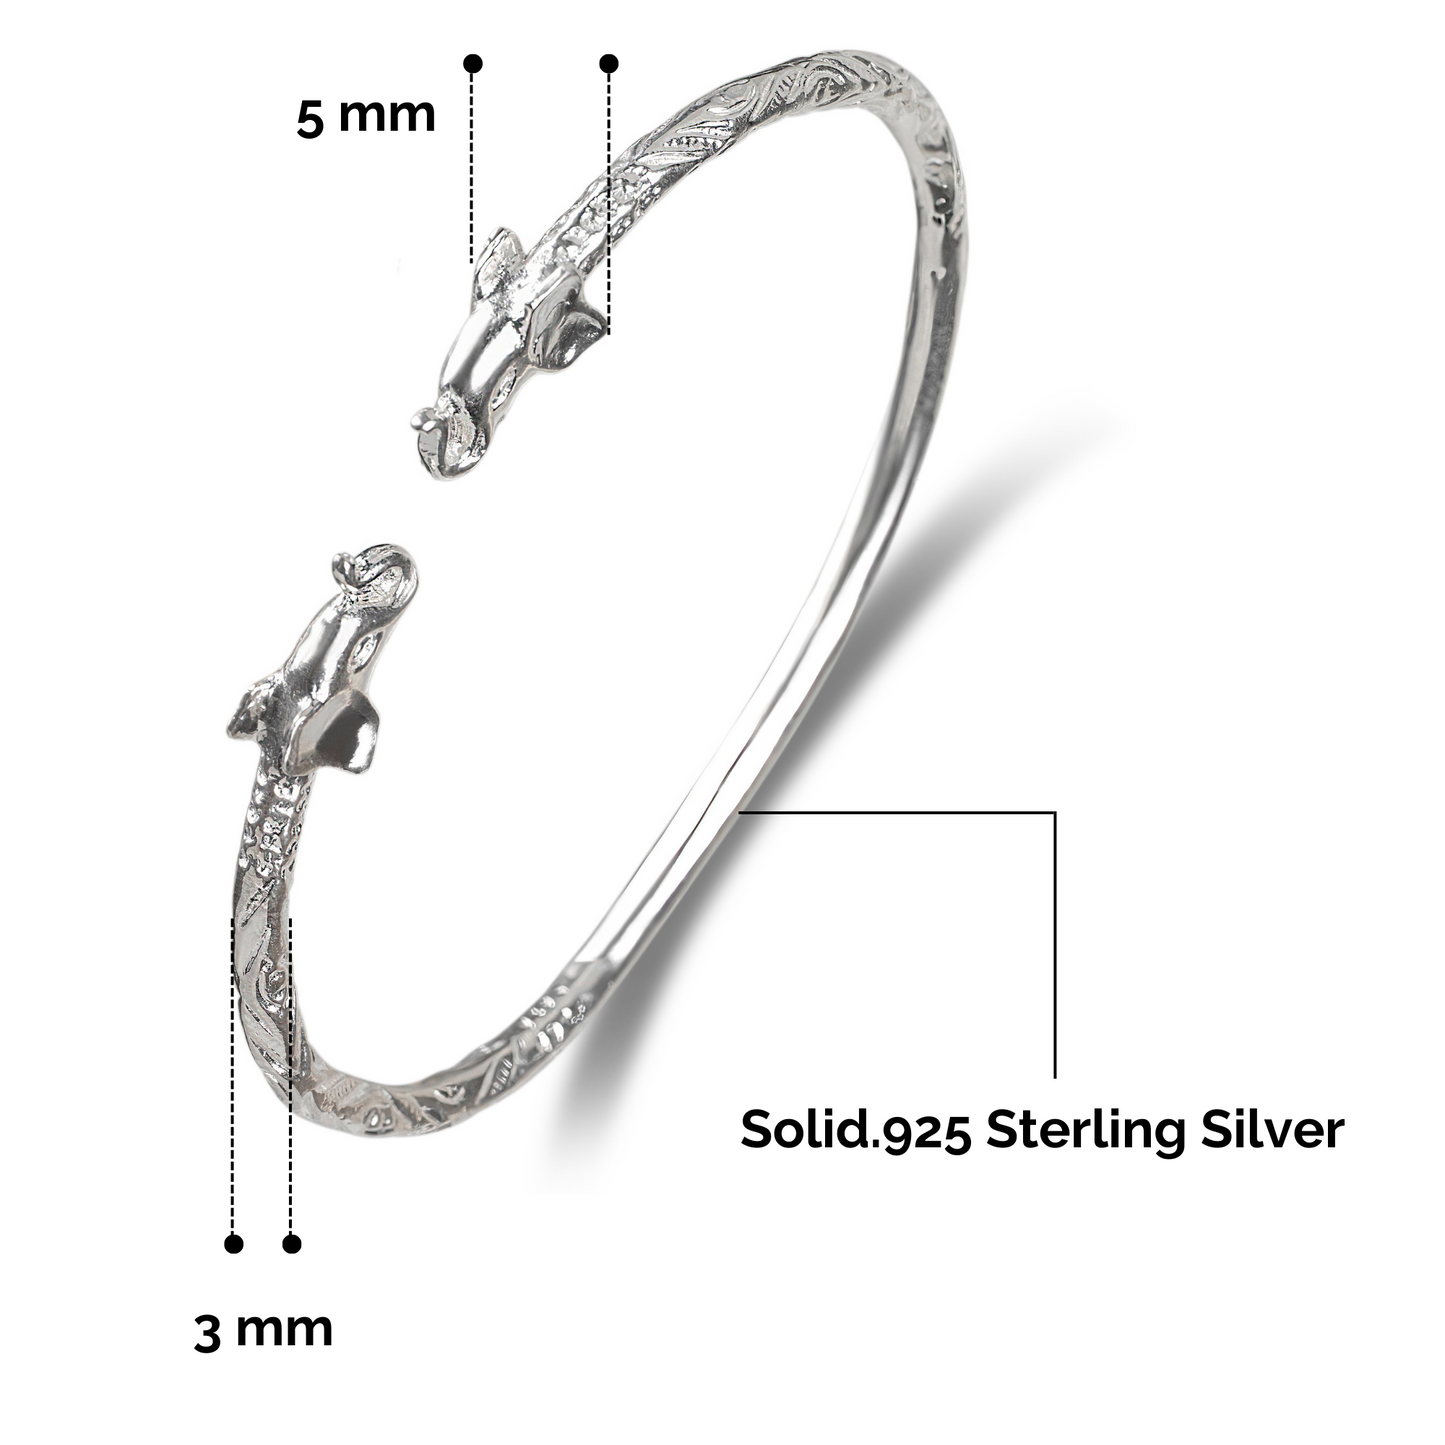 Better Jewelry Elephant .925 Sterling Silver West Indian Bangle, 1 piece